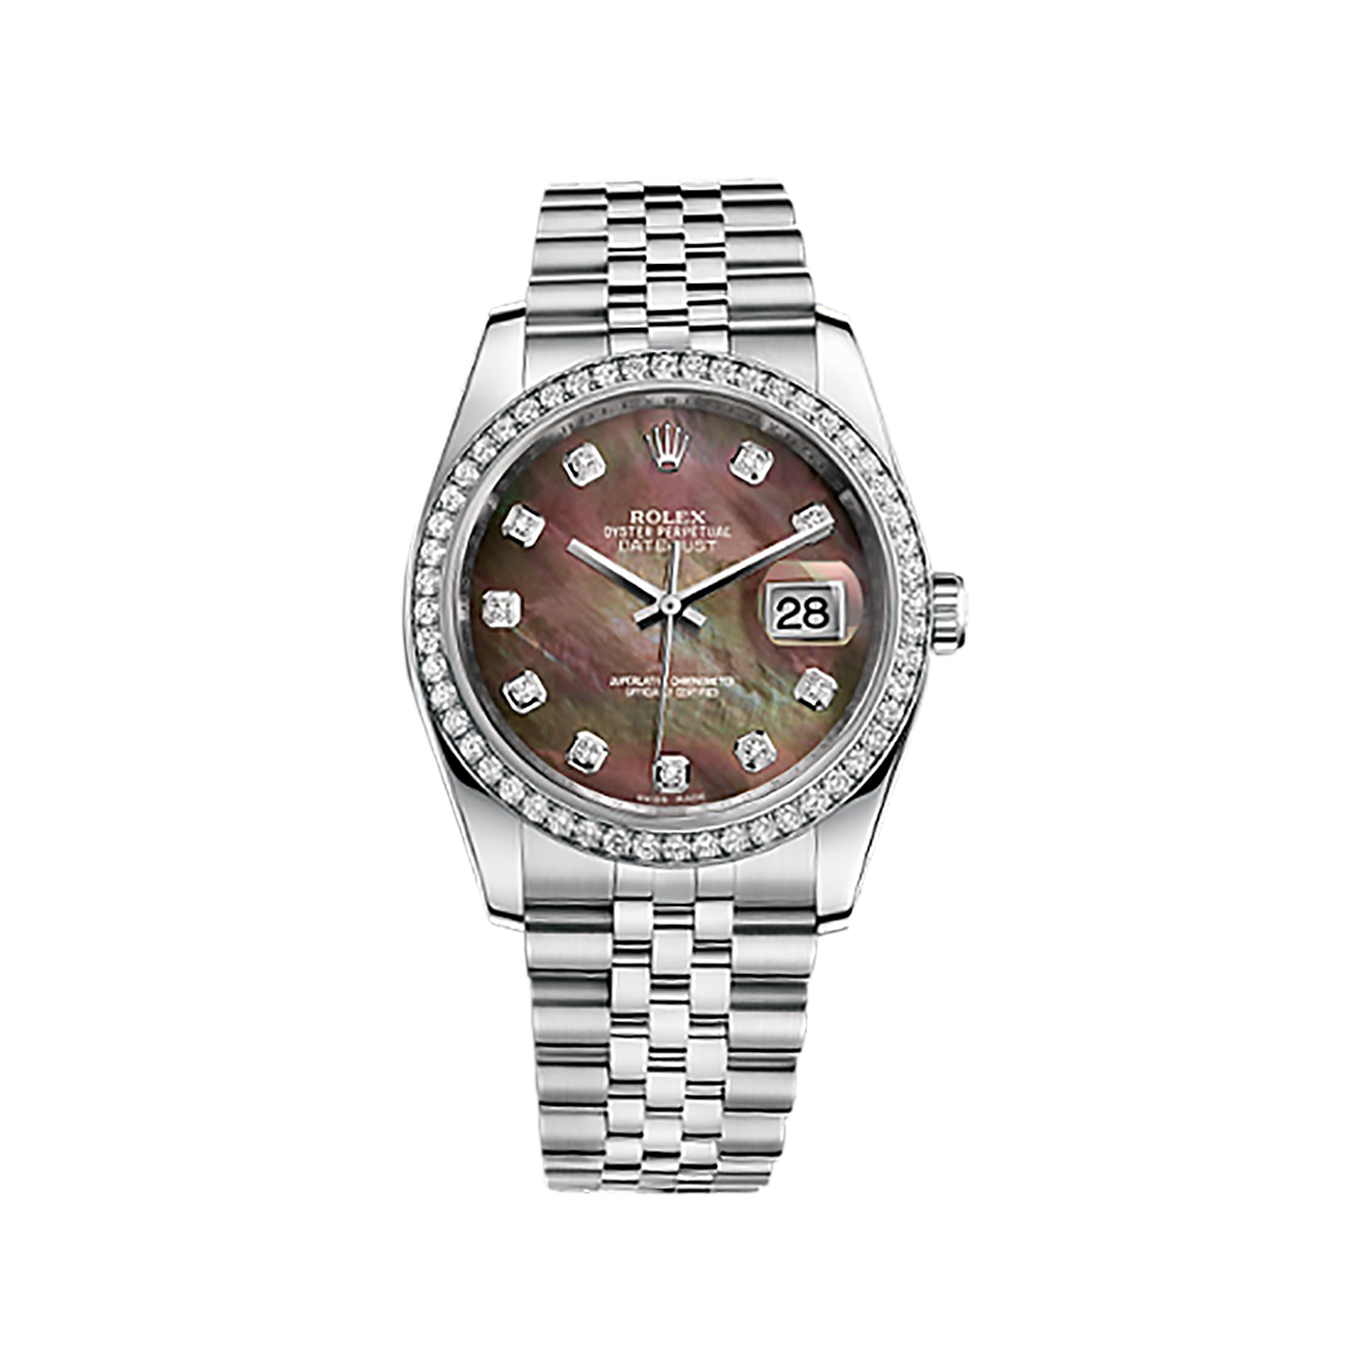 Datejust 36 116244 White Gold & Stainless Steel Watch (Black Mother-of-Pearl Set with Diamonds)